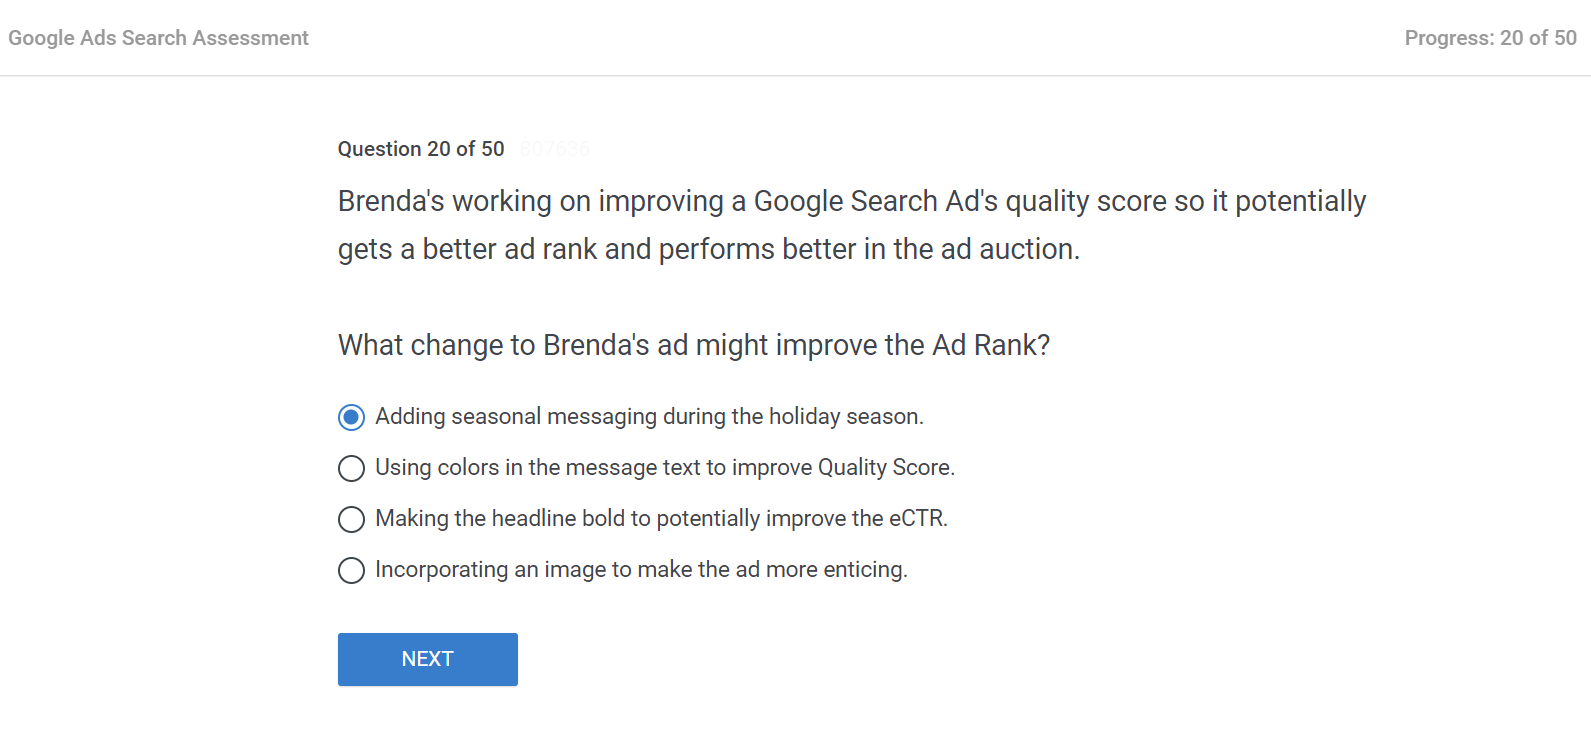 Brenda's working on improving a Google Search Ad's quality score so it potentially gets a better ad rank and performs better in the ad auction.